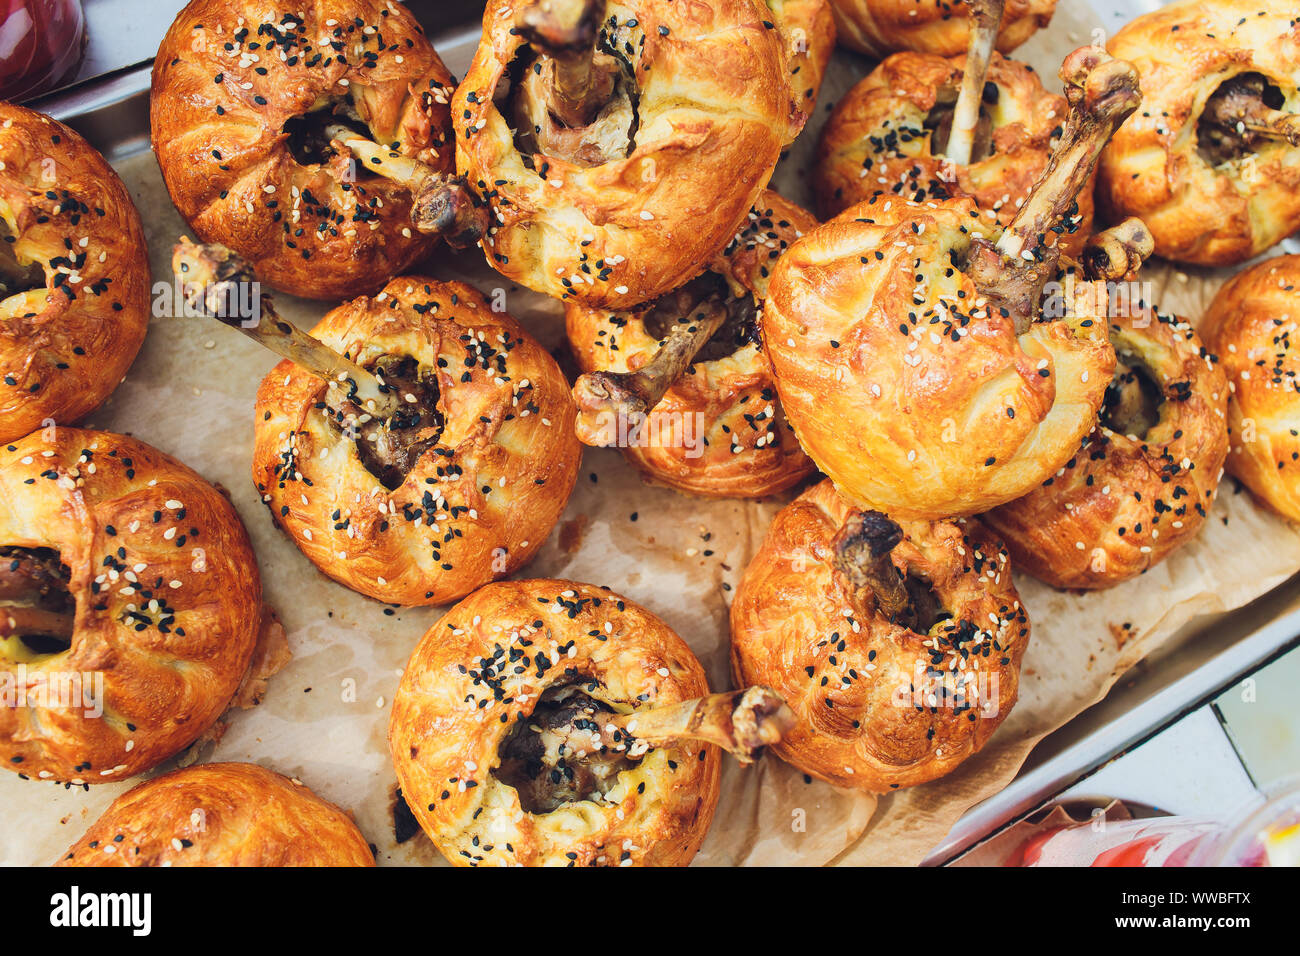 Chicken legs in pastry.Chicken leg in puff pastry on table.Baked chicken Stock Photo